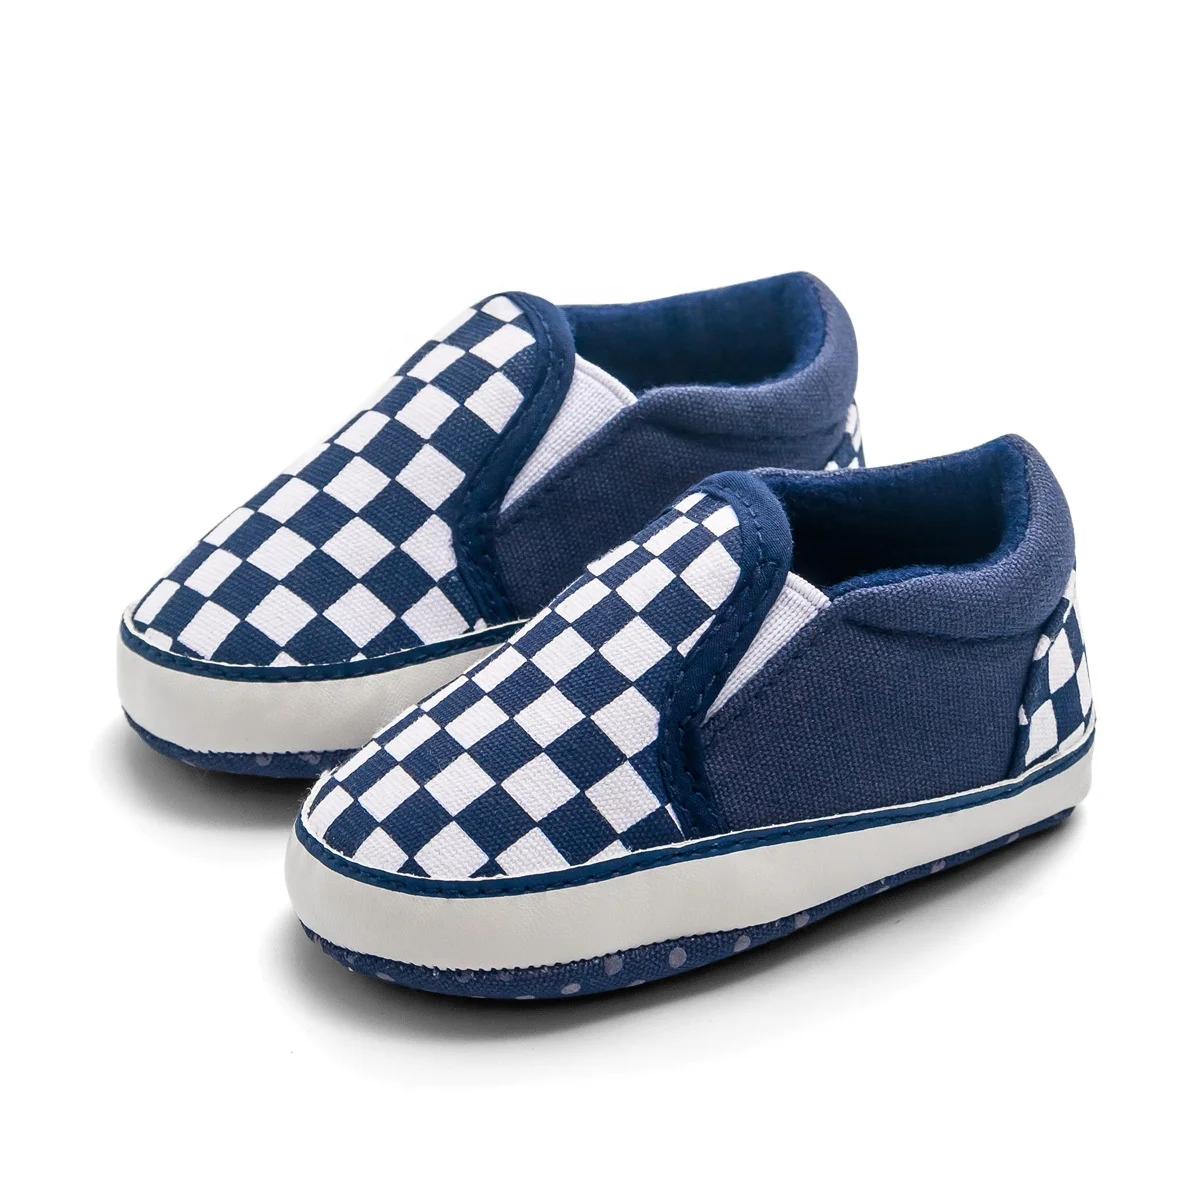 

New arrival 0-18 months plaid cotton fabric soft sole baby boys and girls newborn baby loafer first walk shoes